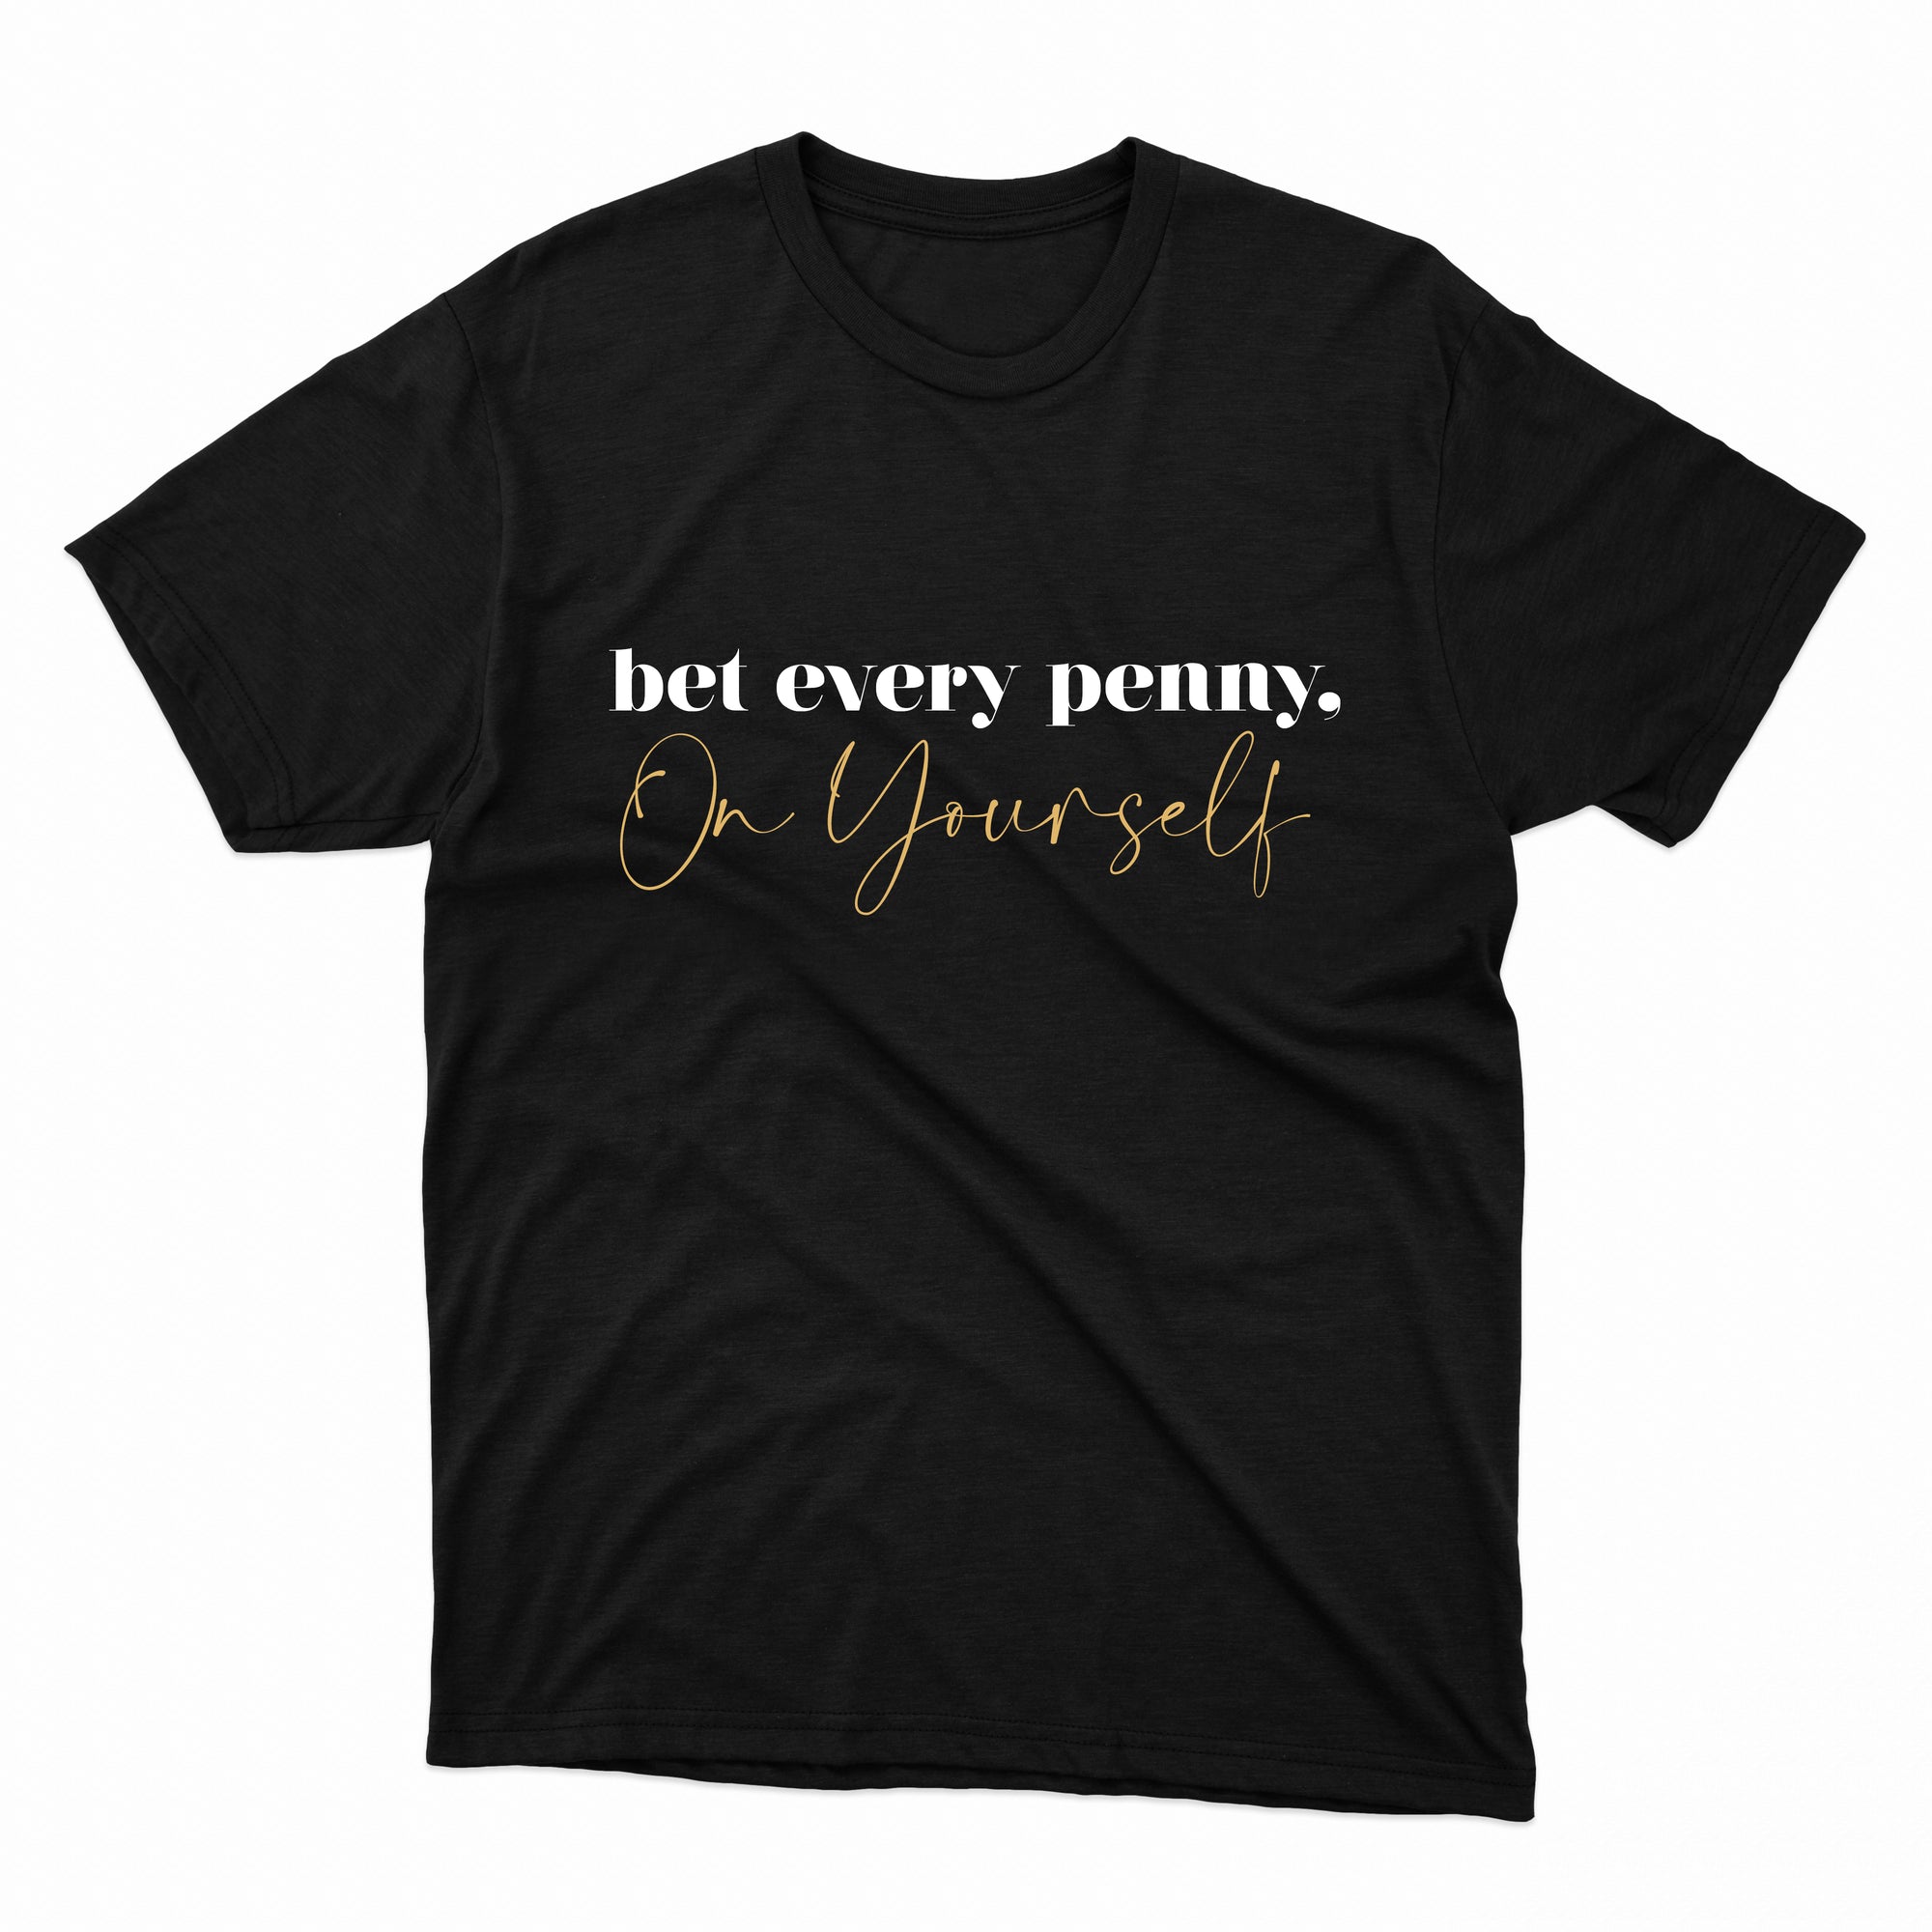 Bet every penny T-shirt